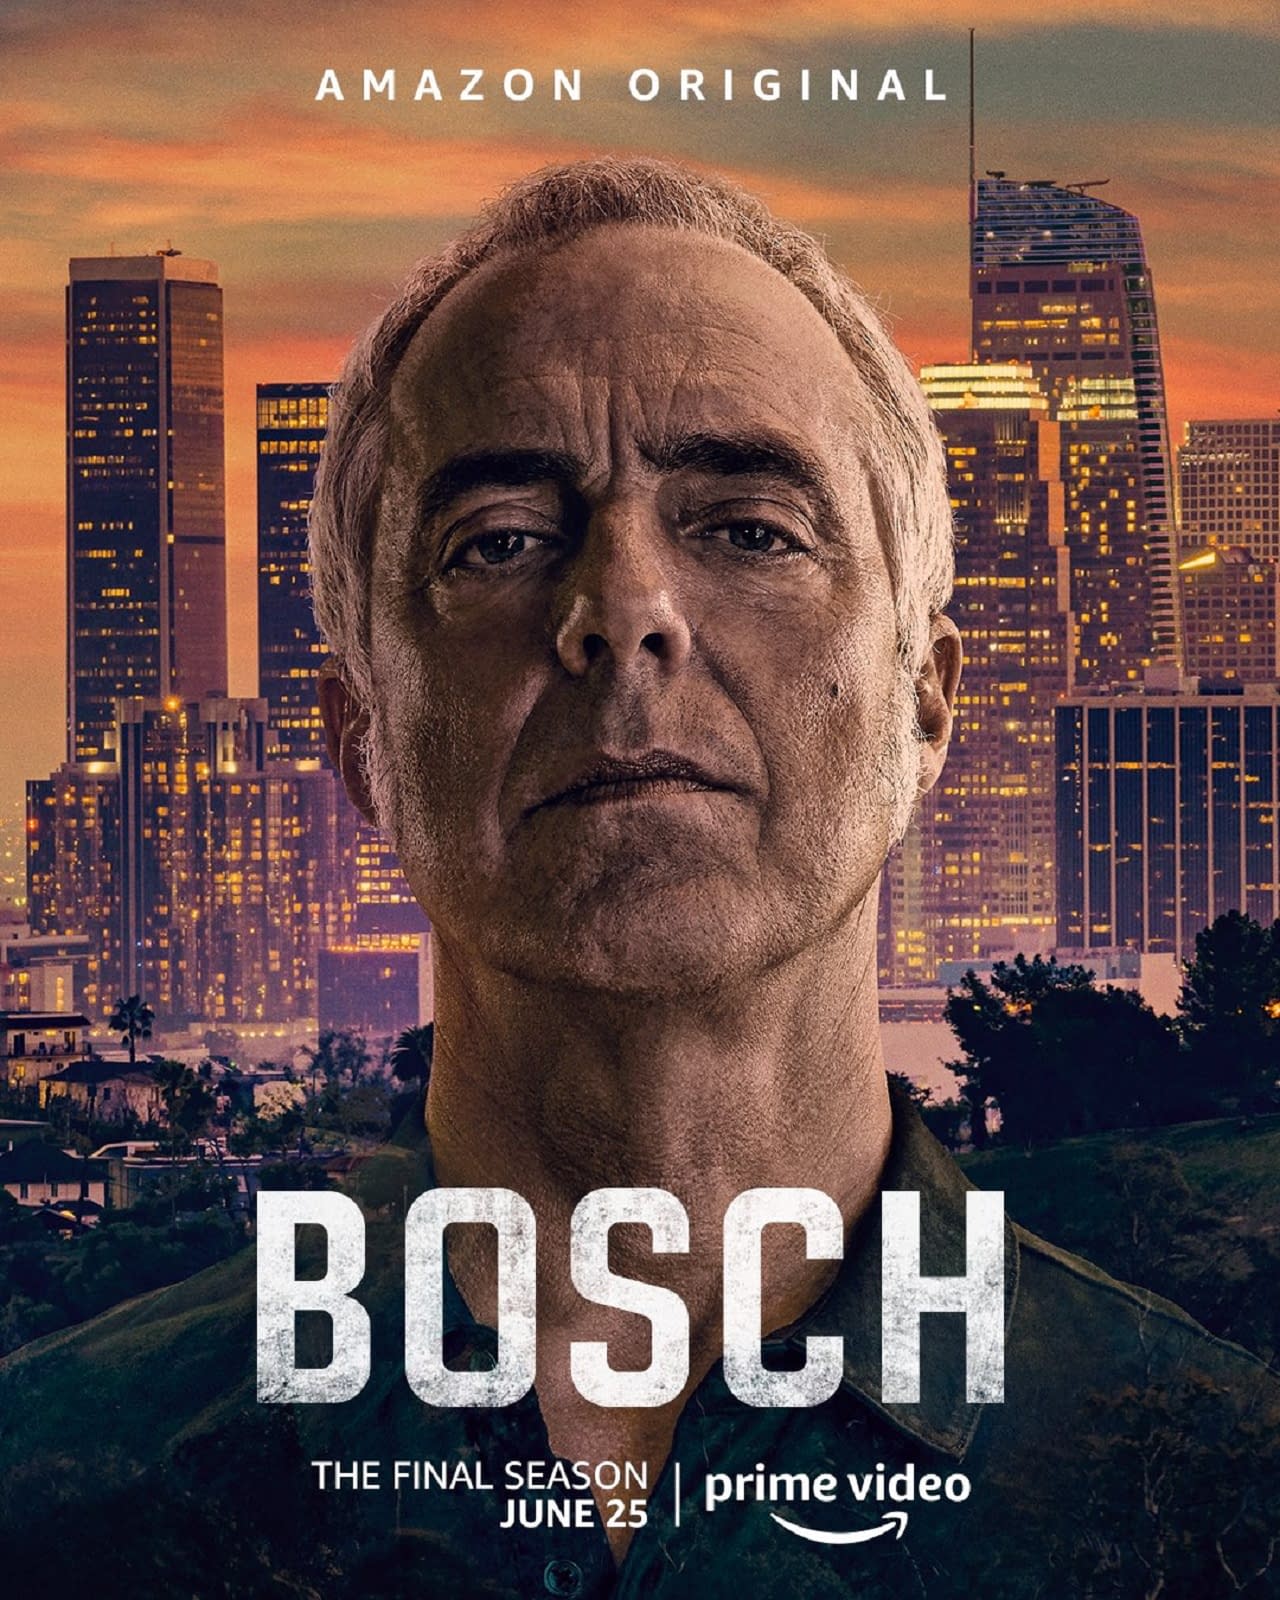 Titus Welliver previews Bosch Legacy — watch the exclusive trailer